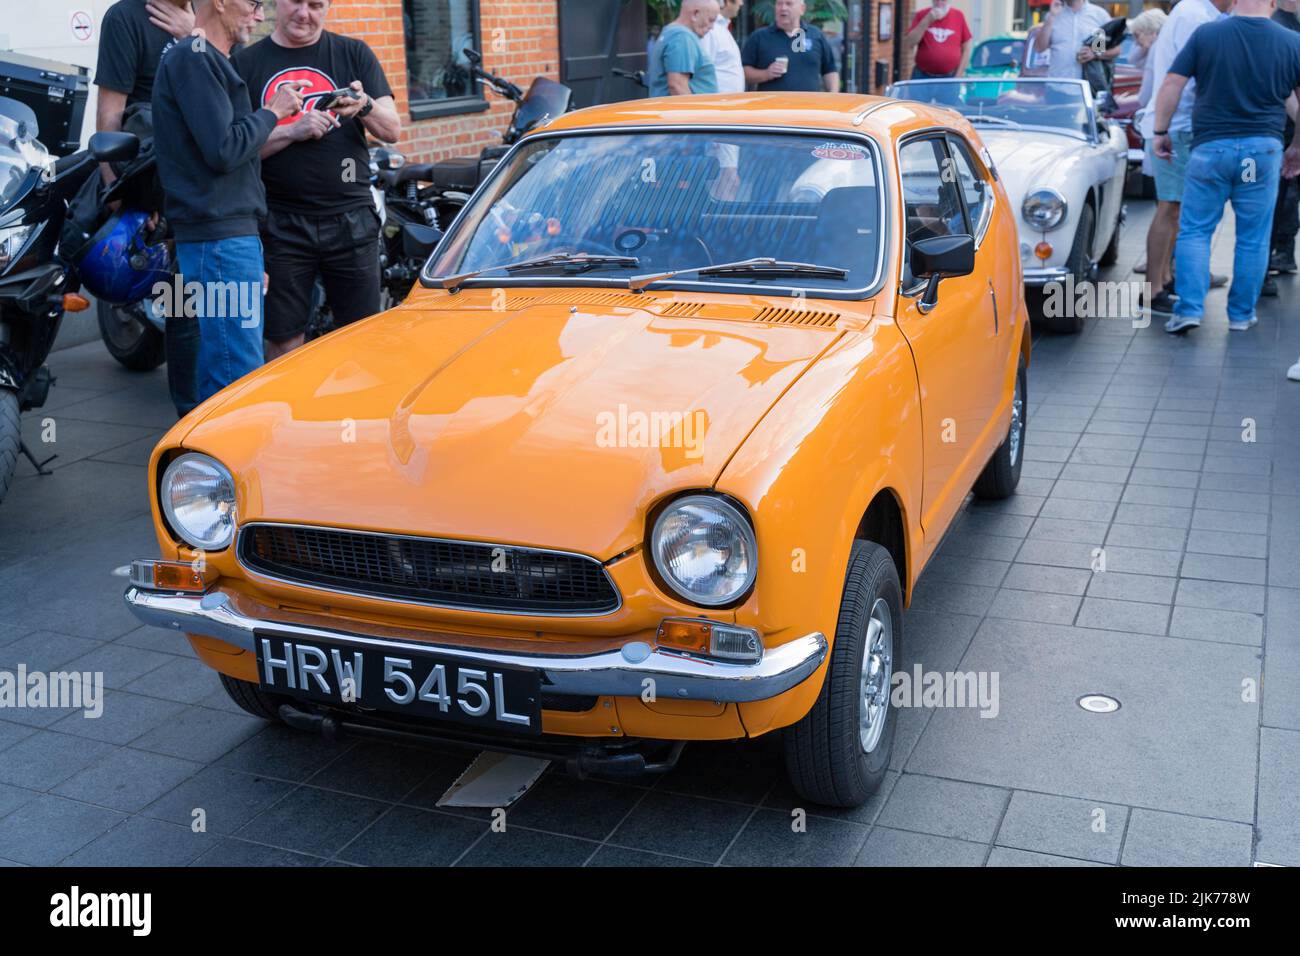 'Park it in the Market' classic car show at Greenwich Market South east London England UK Stock Photo